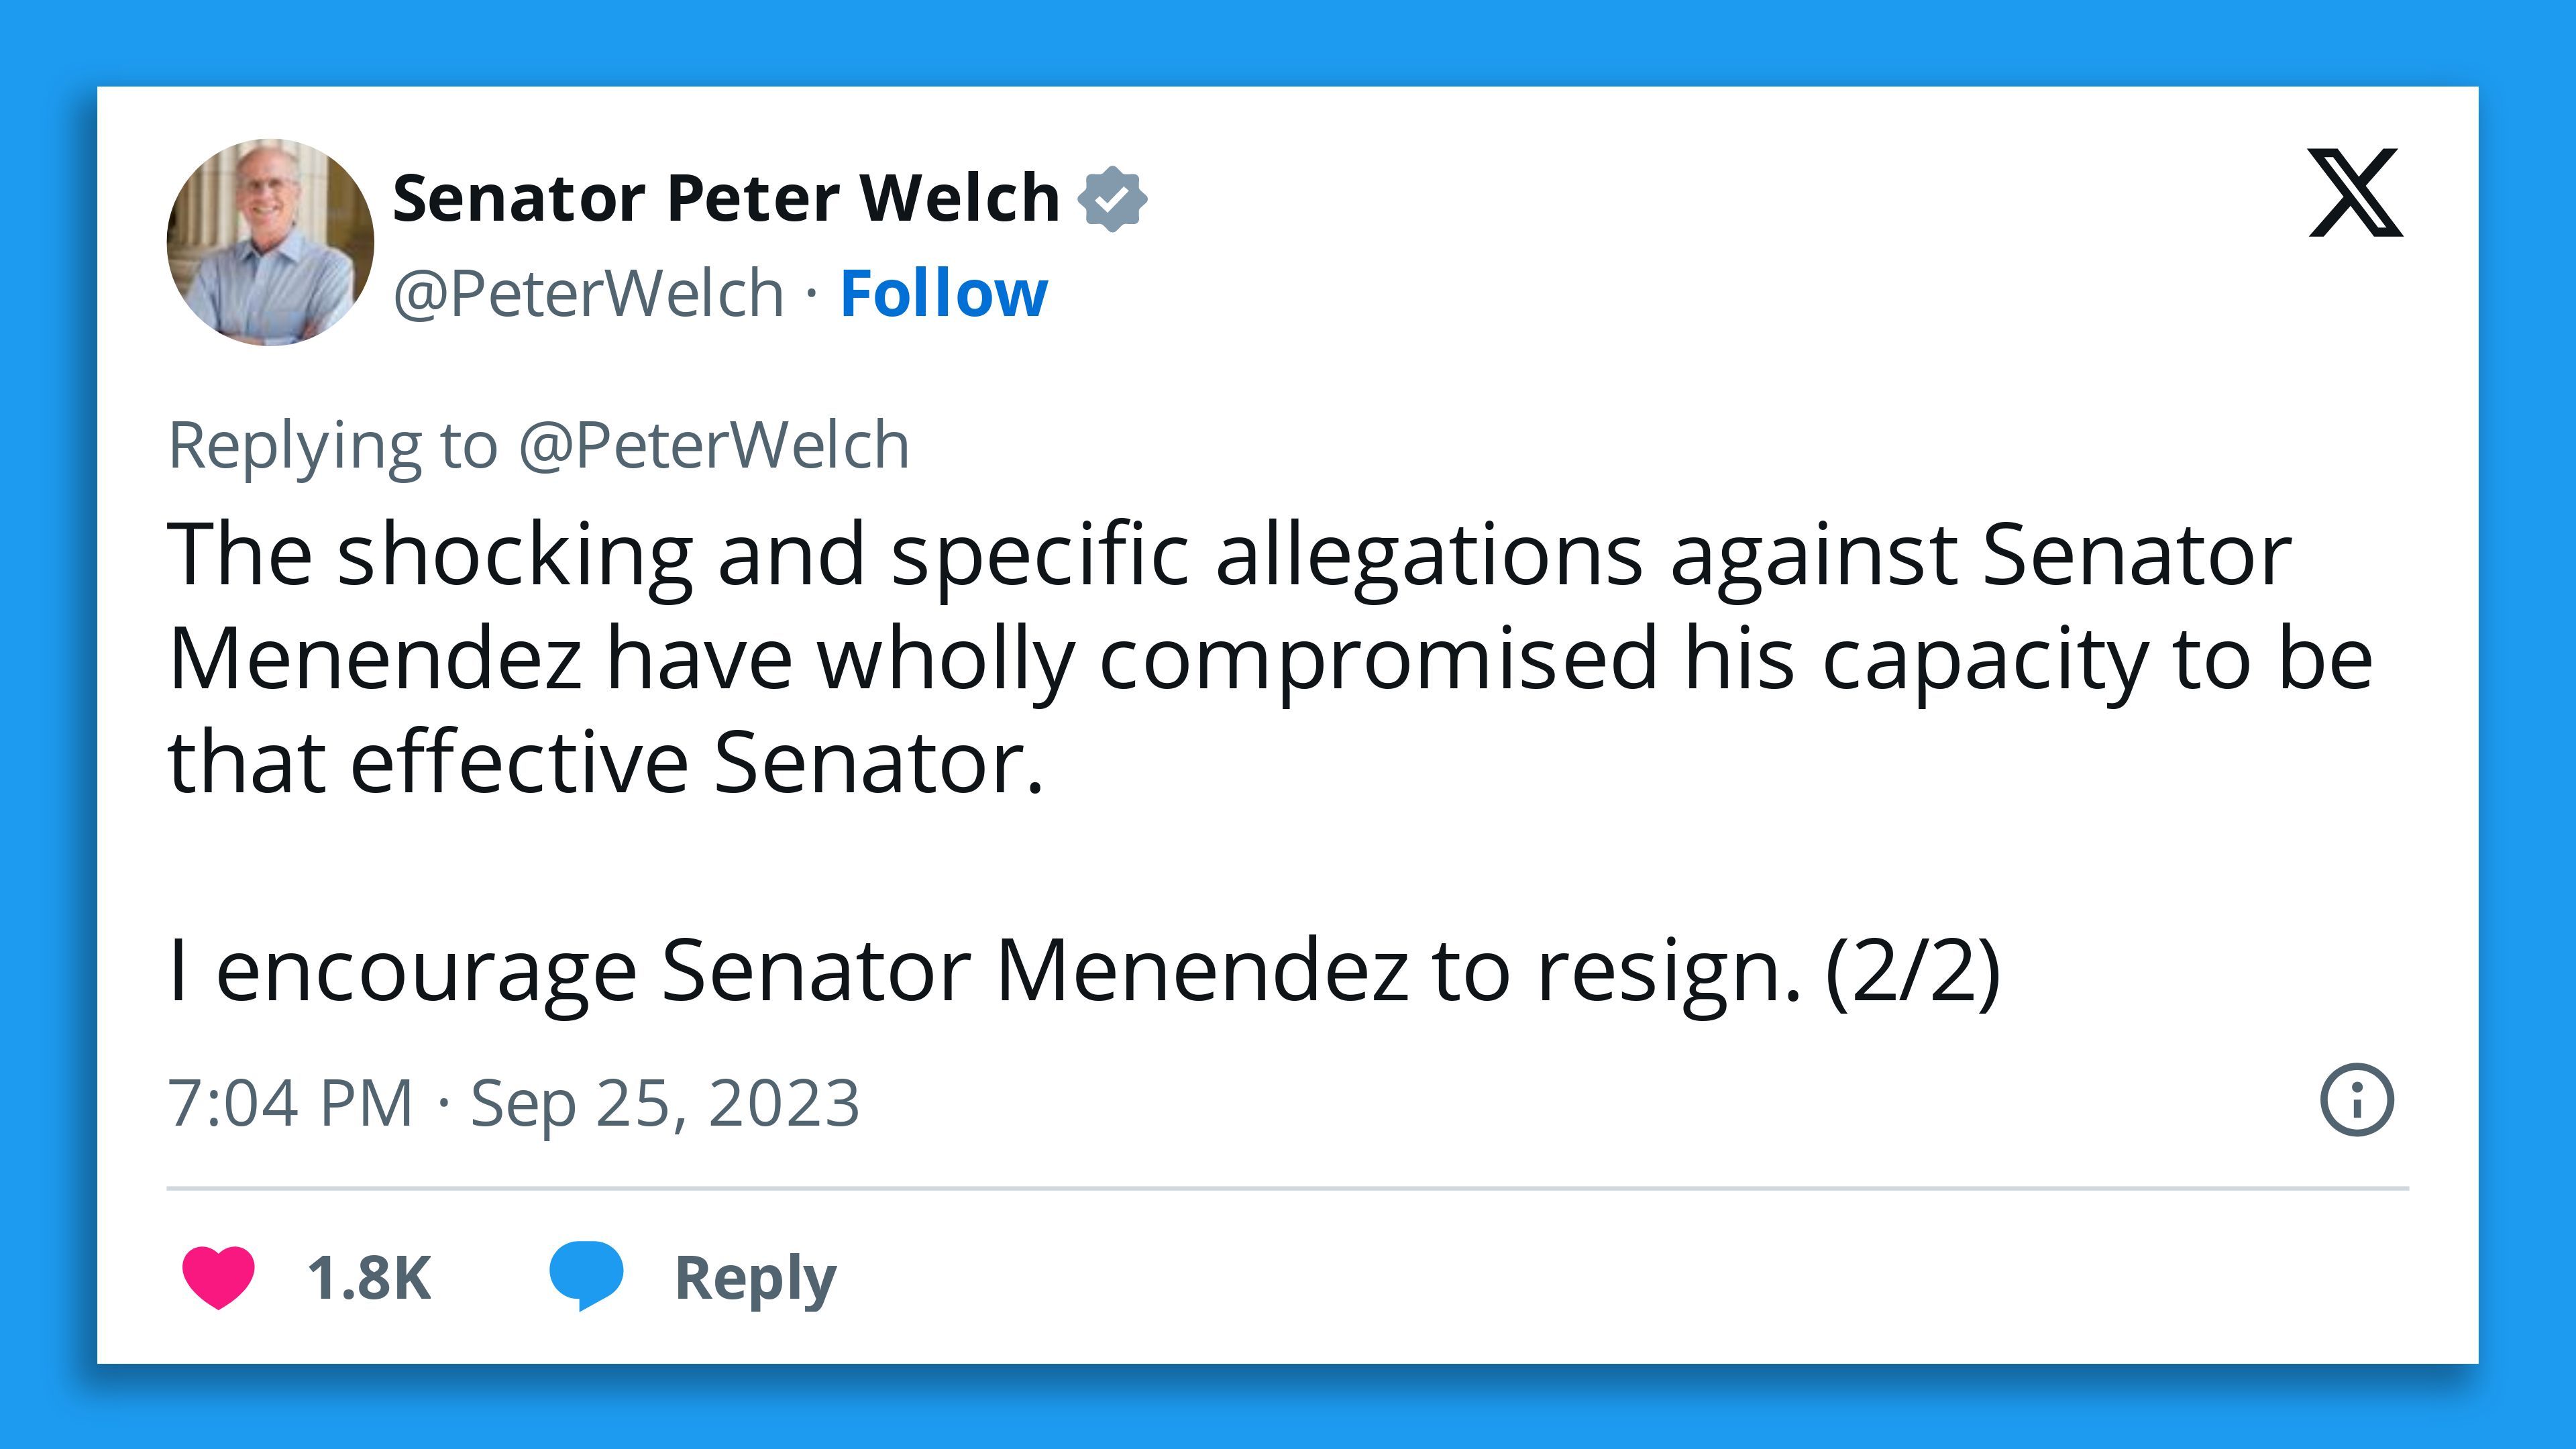 A screenshot of a tweet by Democratic Sen. Peter Welch, saying: "The shocking and specific allegations against Senator Menendez have wholly compromised his capacity to be that effective Senator.  I encourage Senator Menendez to resign."